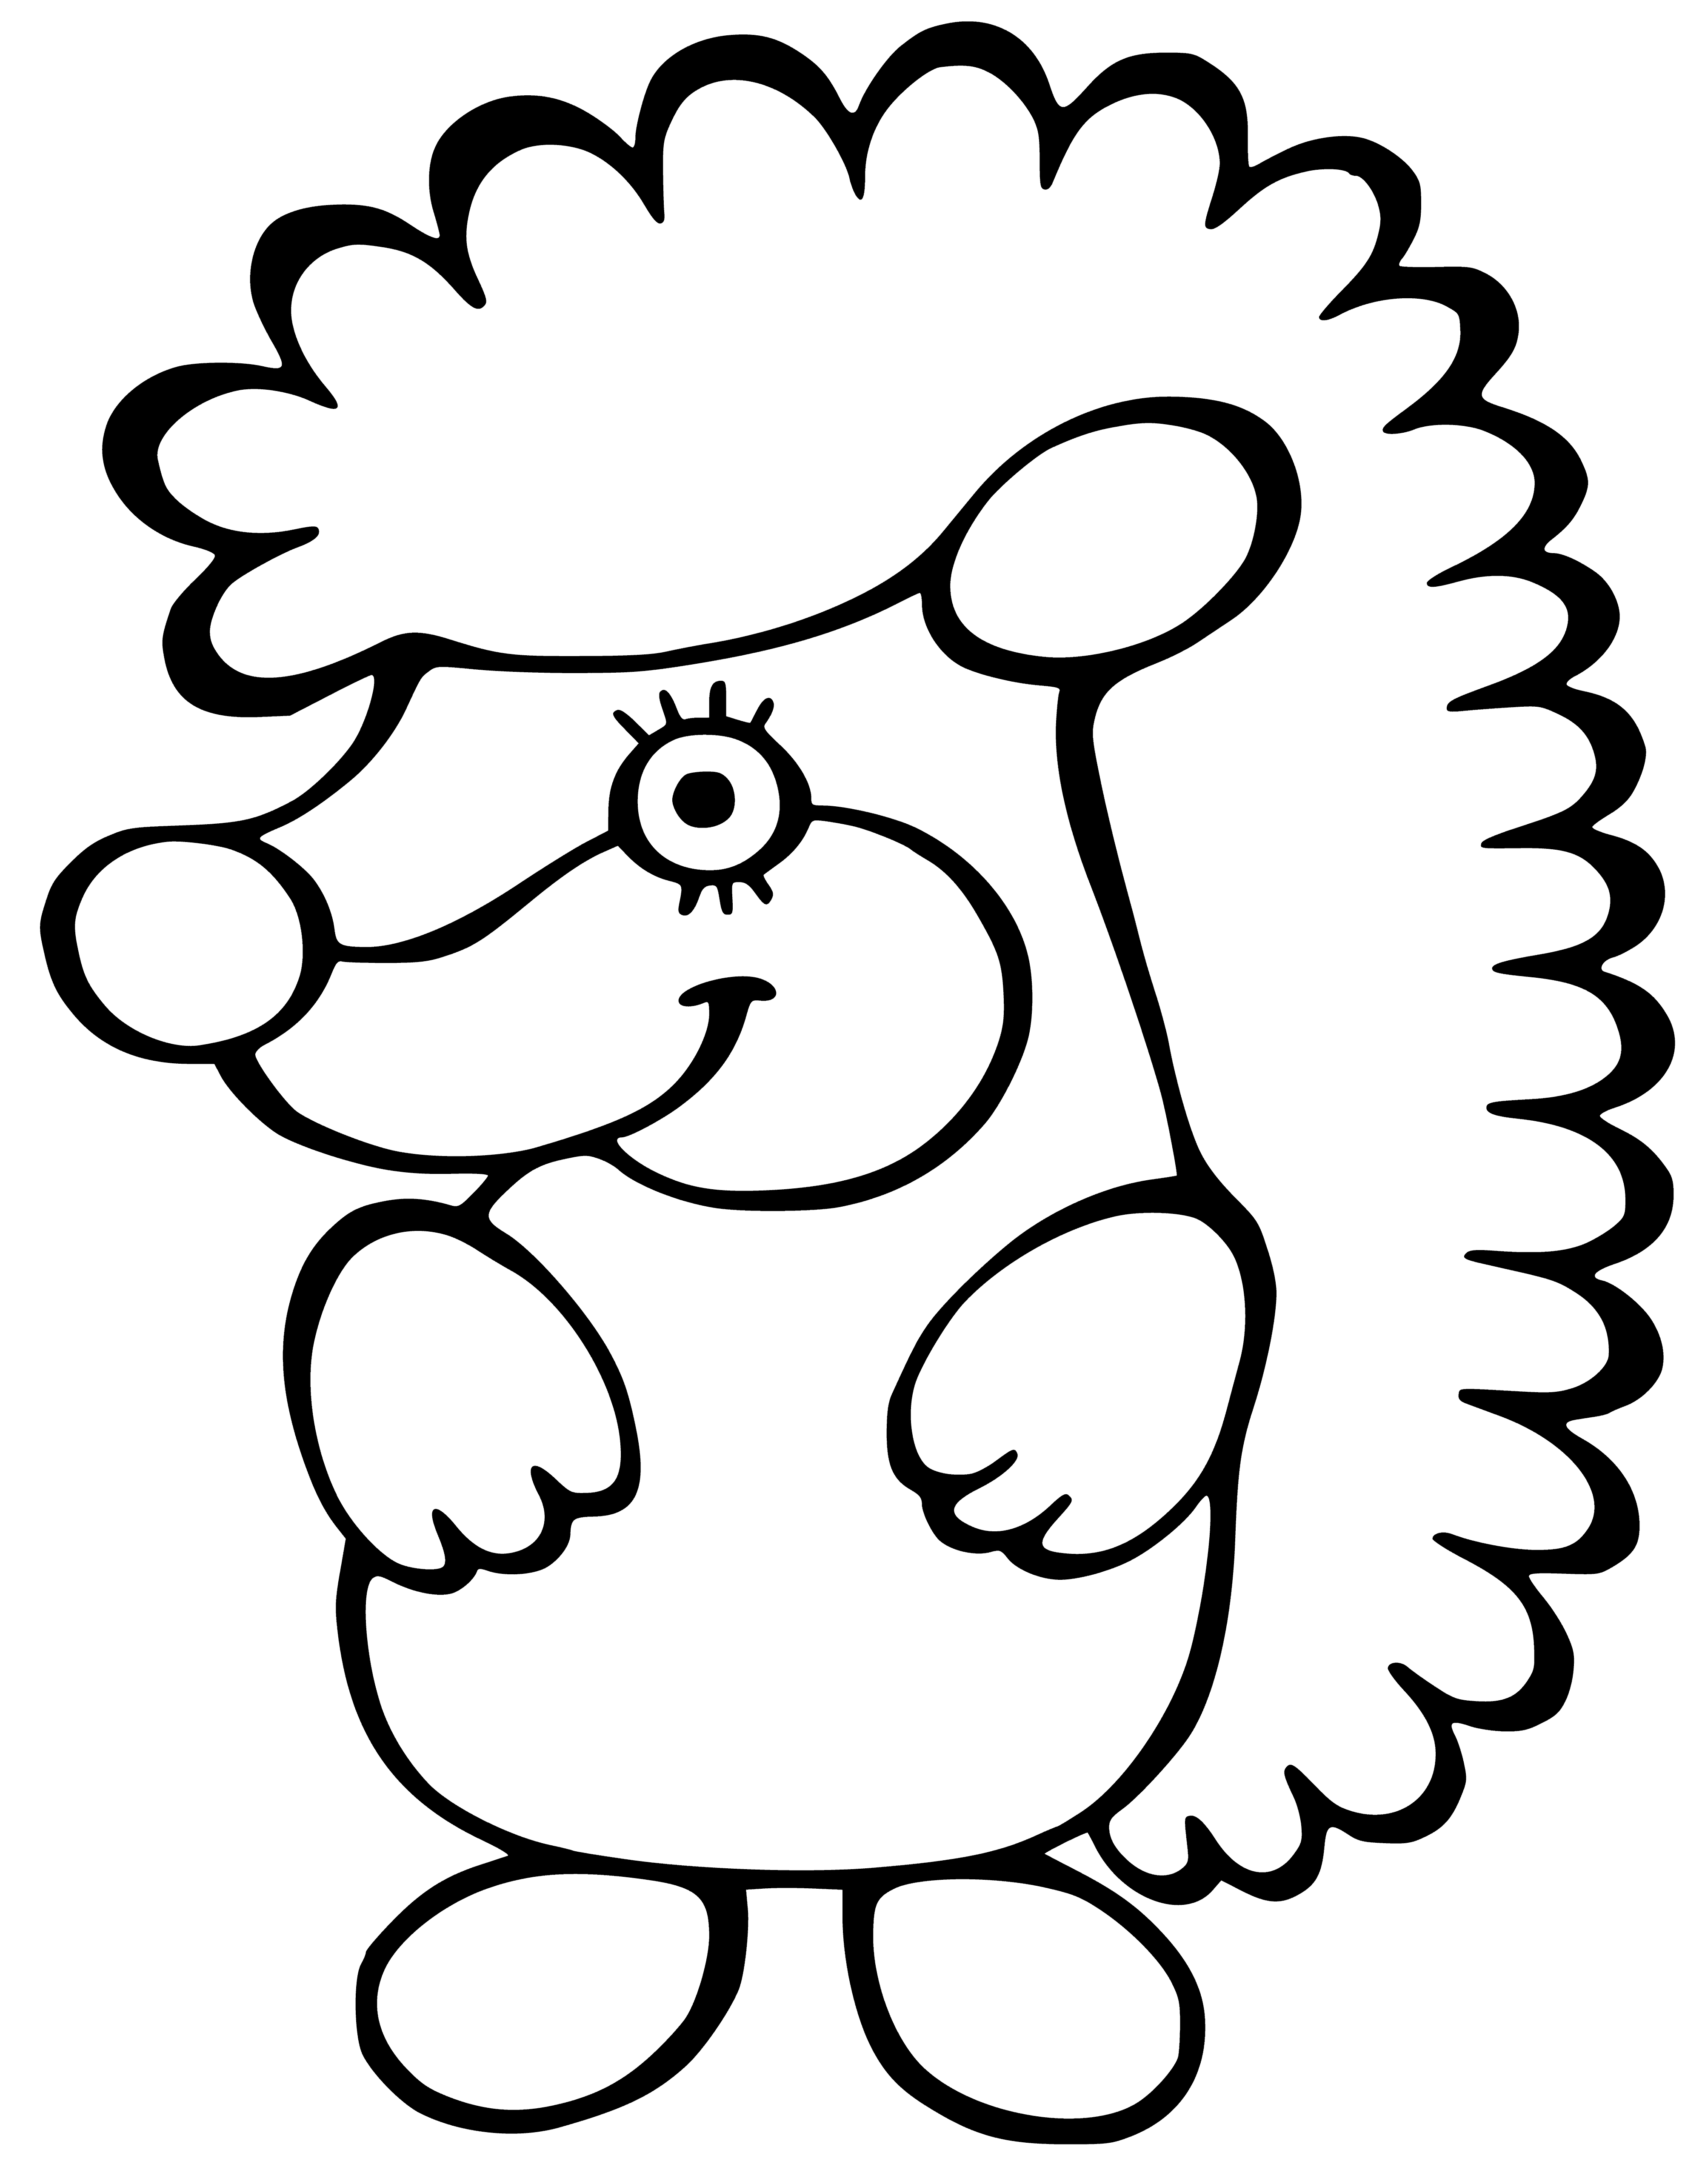 coloring page: A small spiny mammal, the hedgehog has a brown back and white belly, and sharp spines. #hedgehog